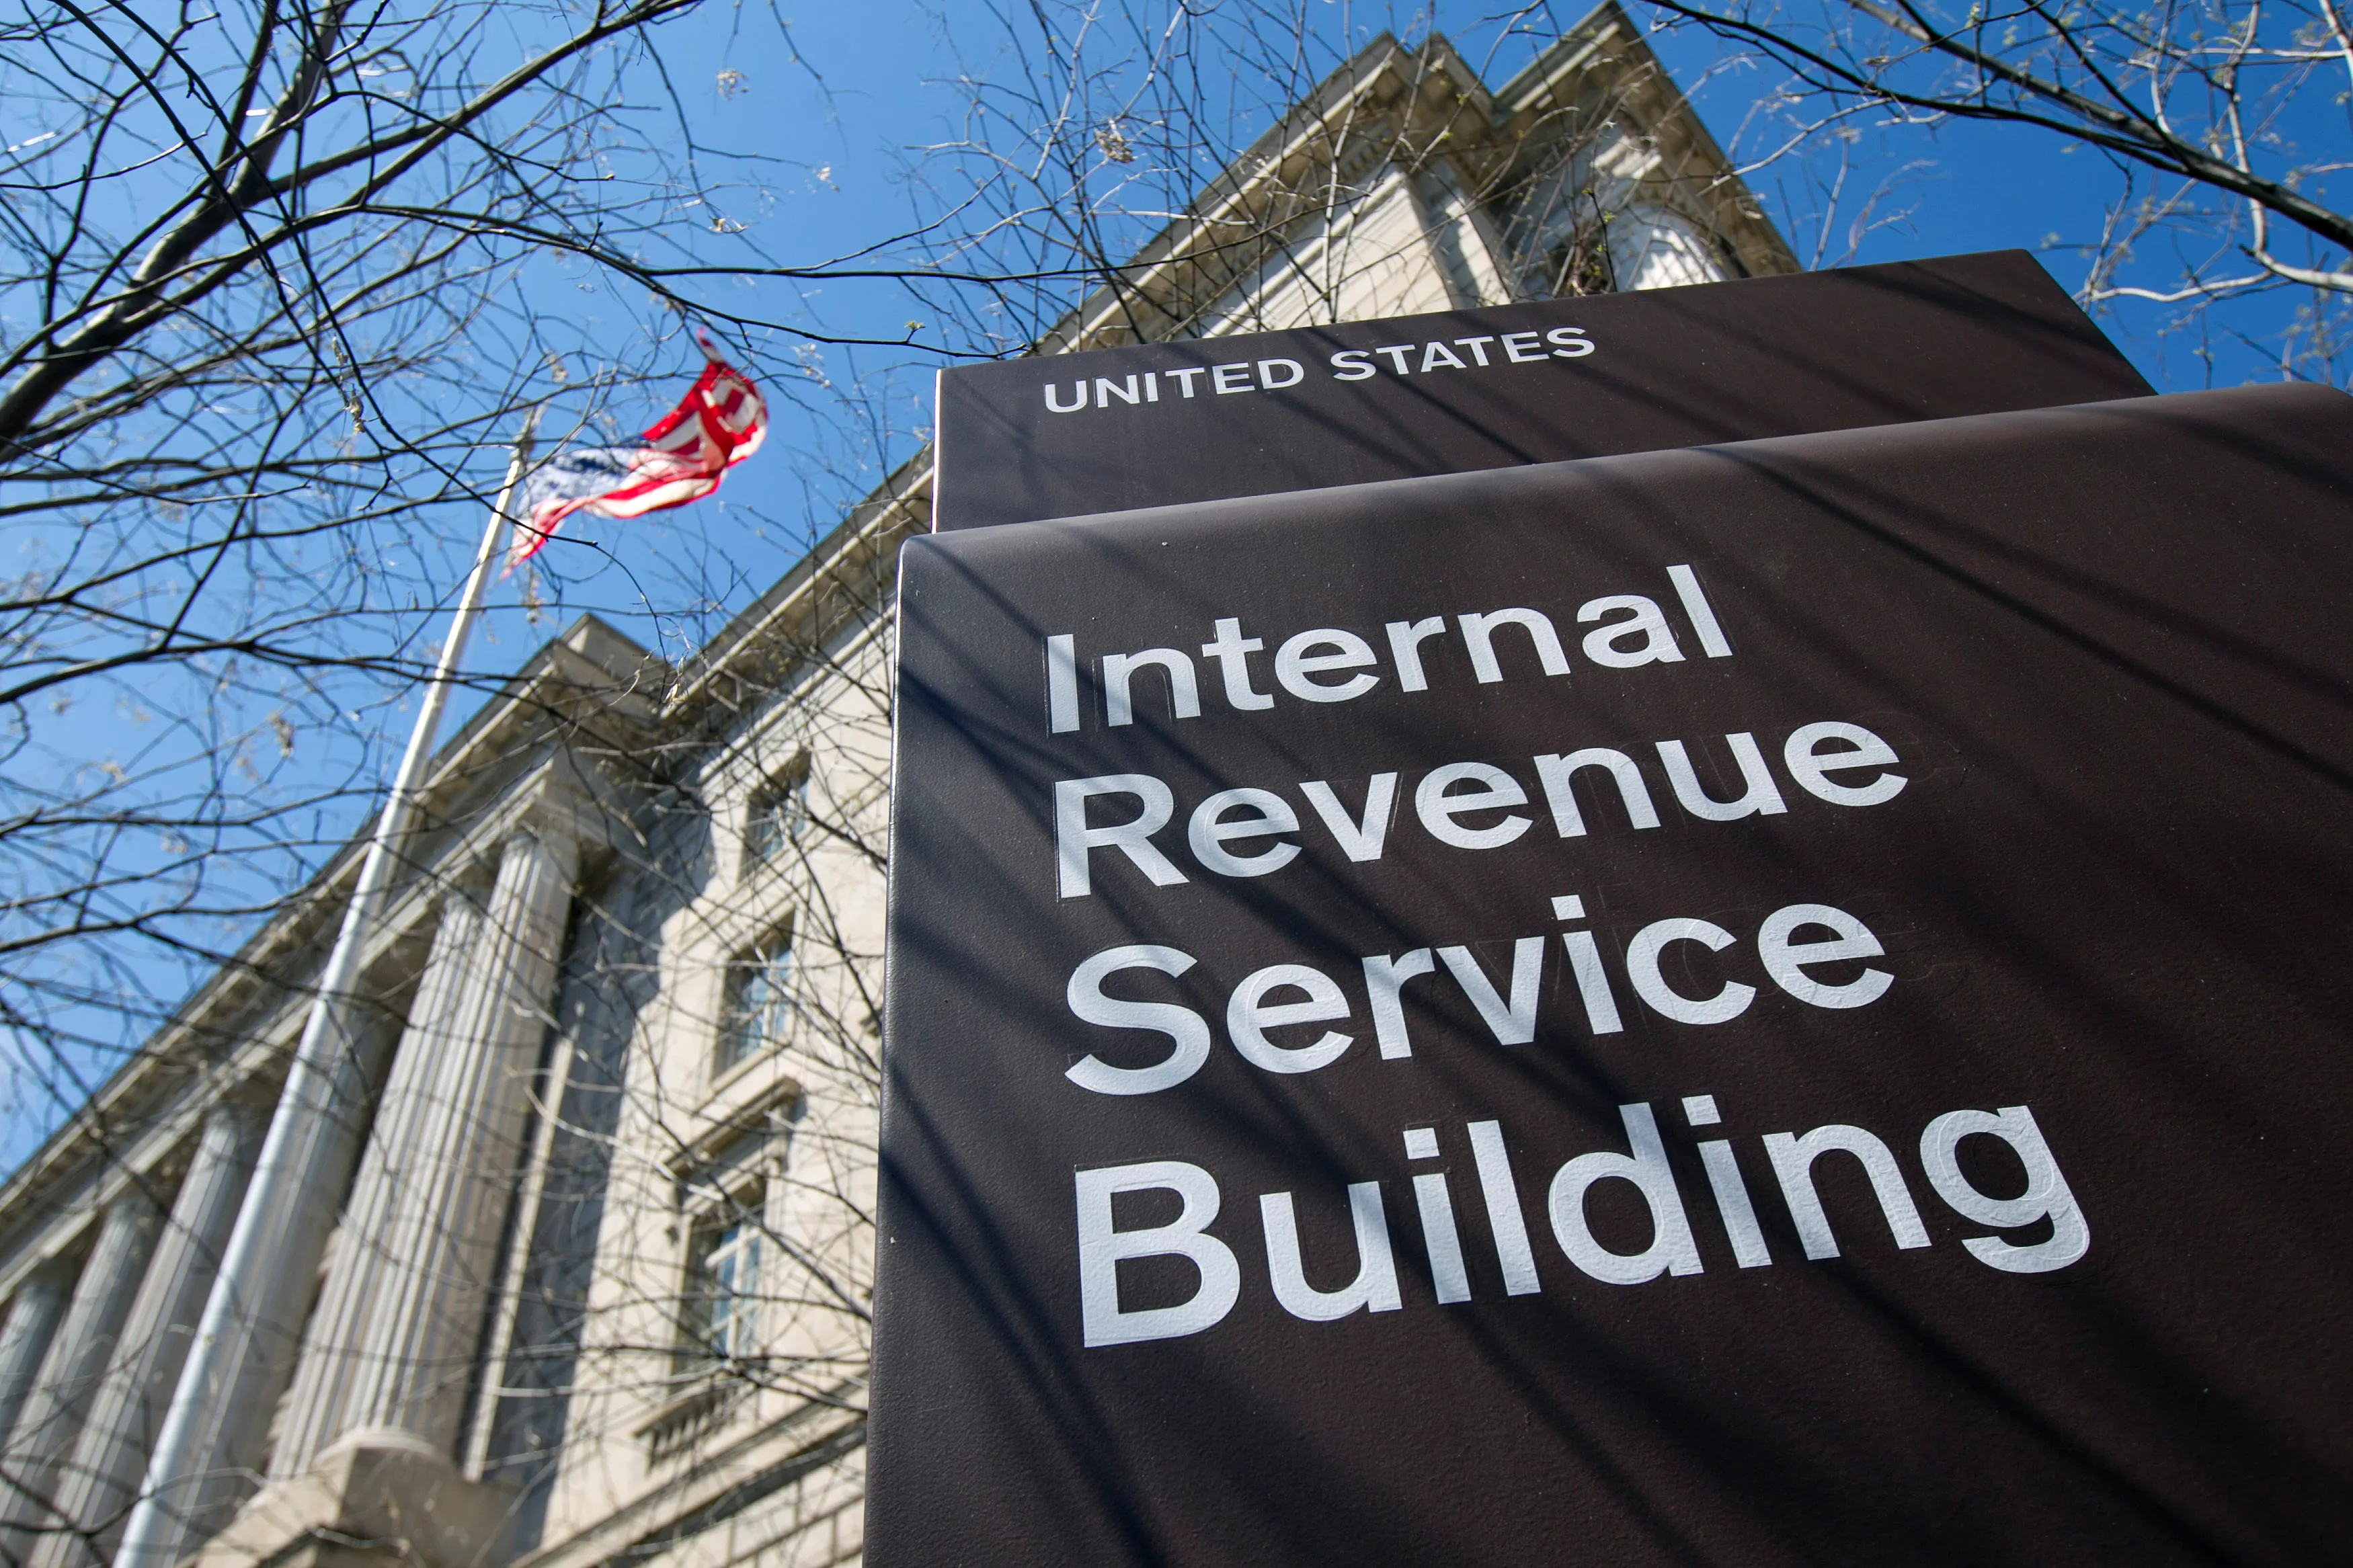 The US Internal Revenue Service has deployed artificial intelligence to audit wealthy taxpayers